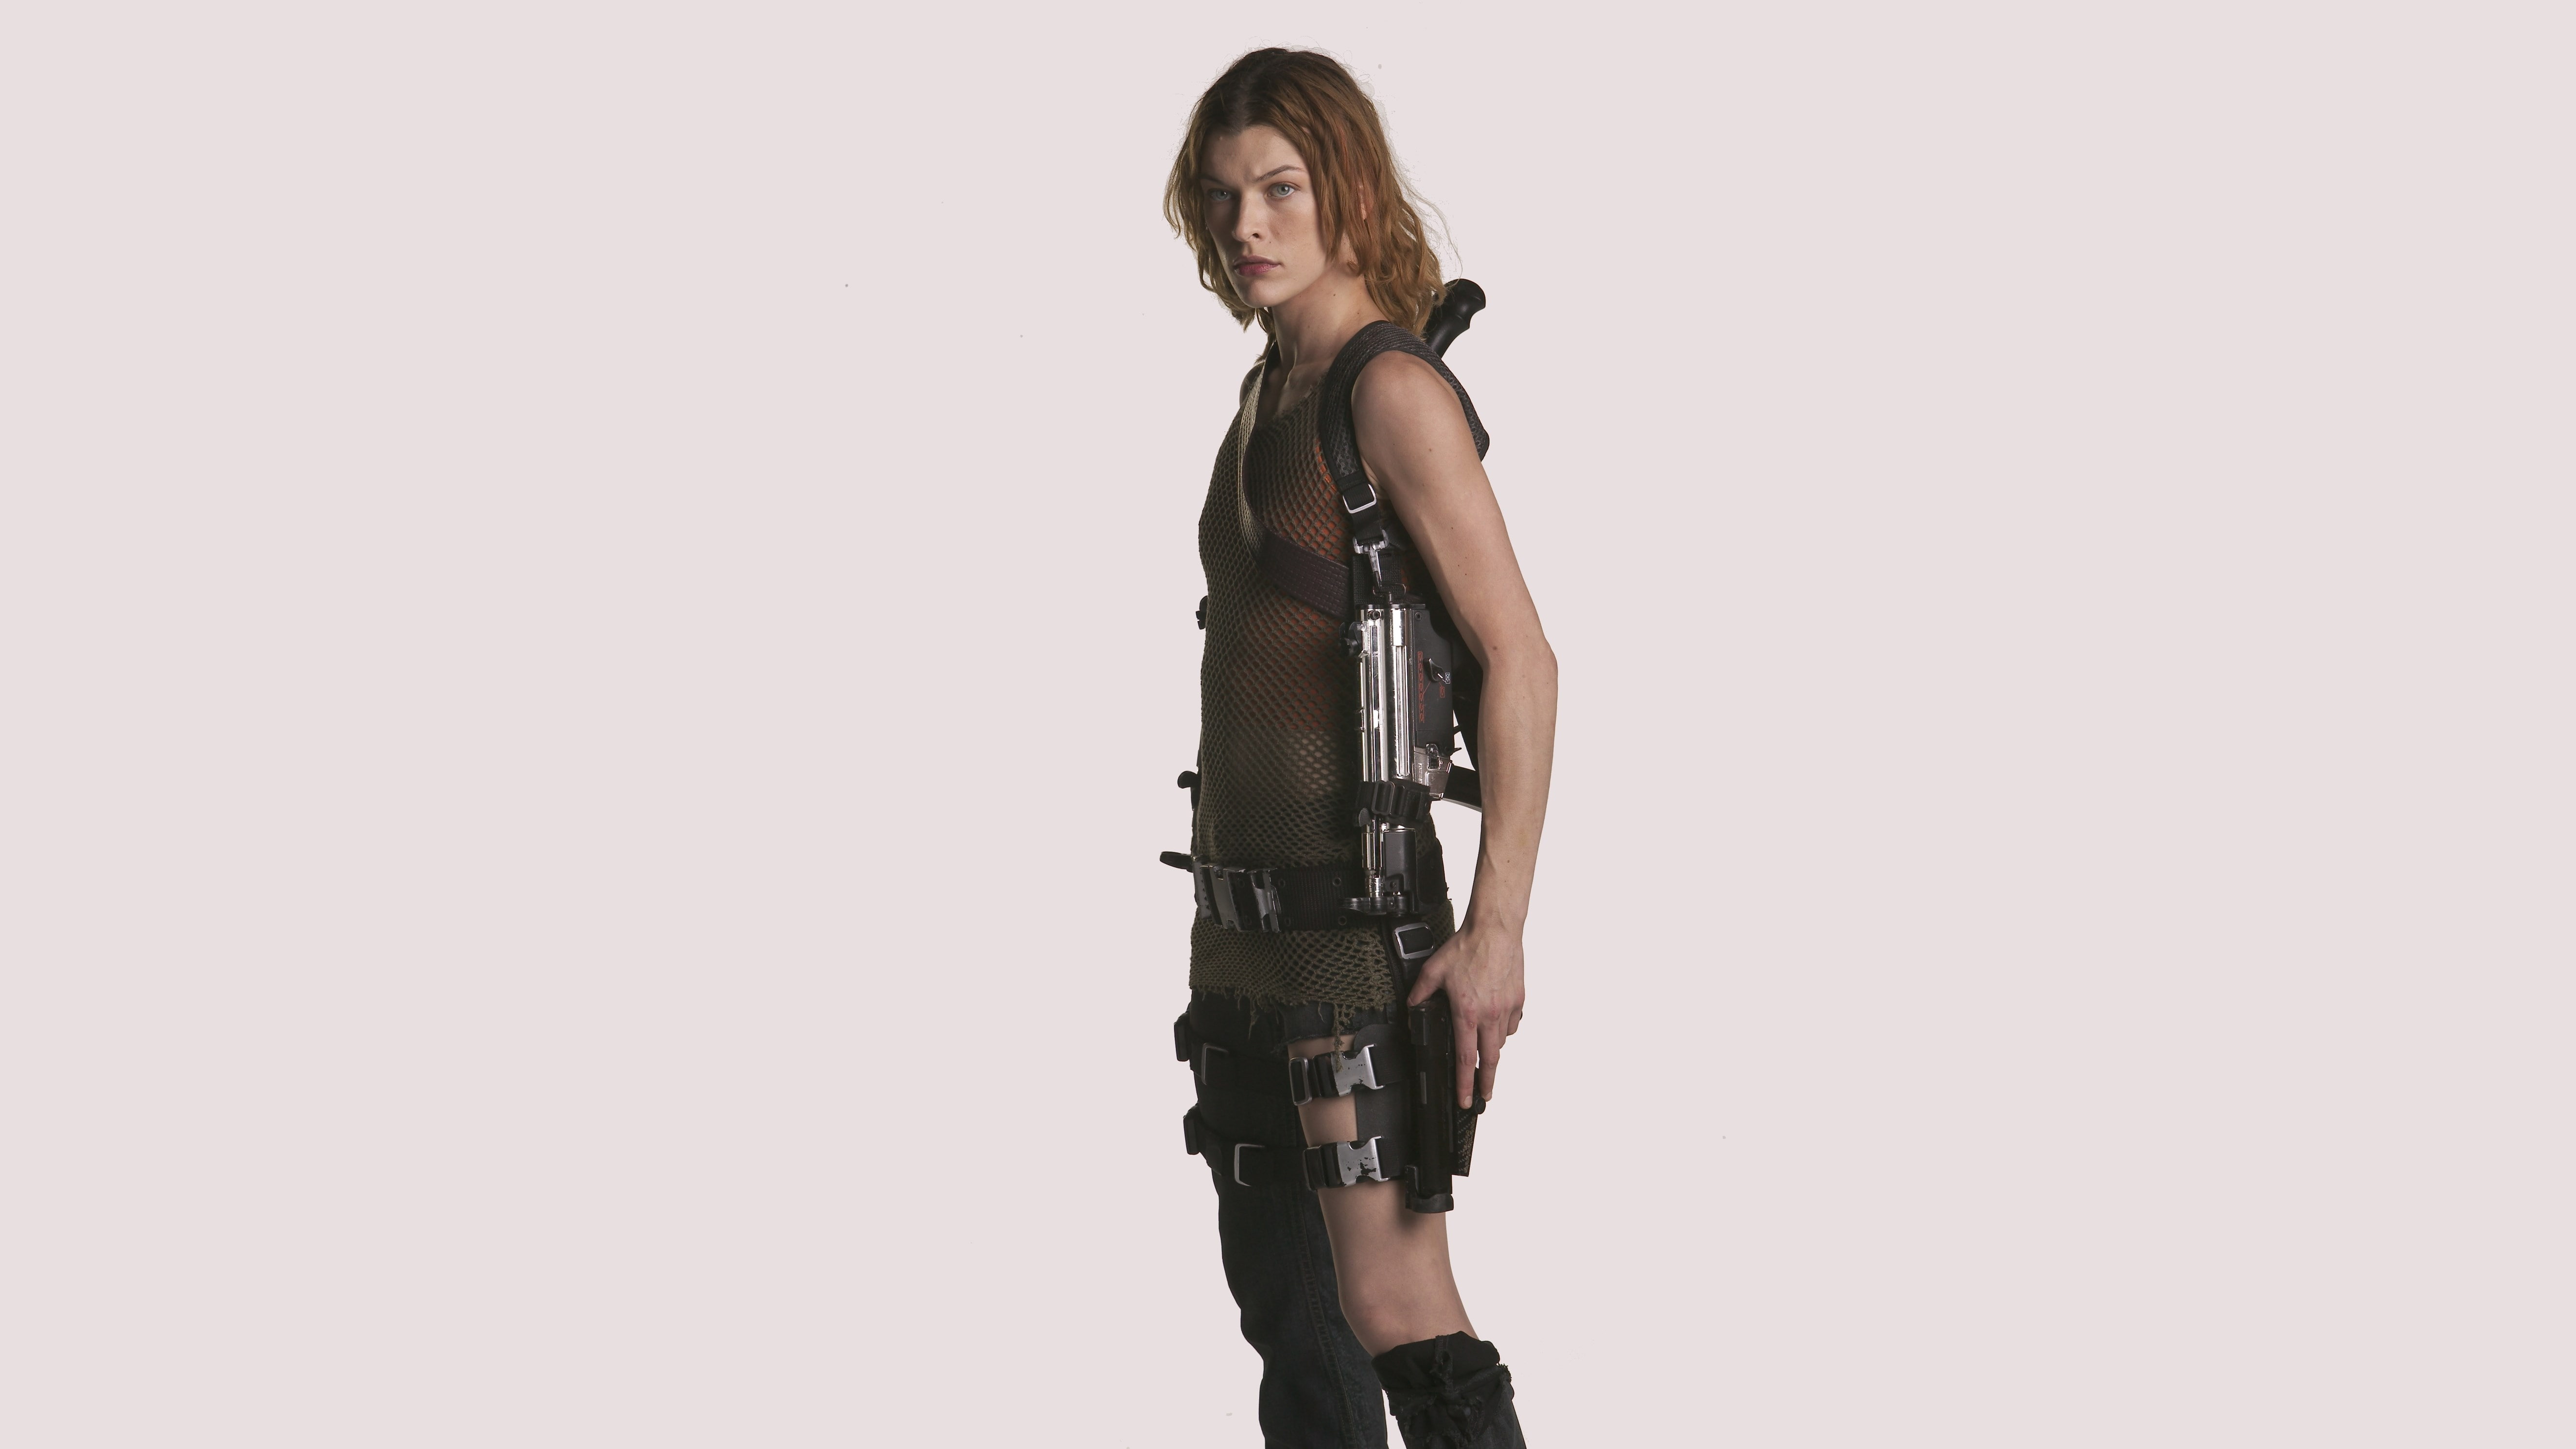 resident evil apocalypse, portrait, one person, looking at camera